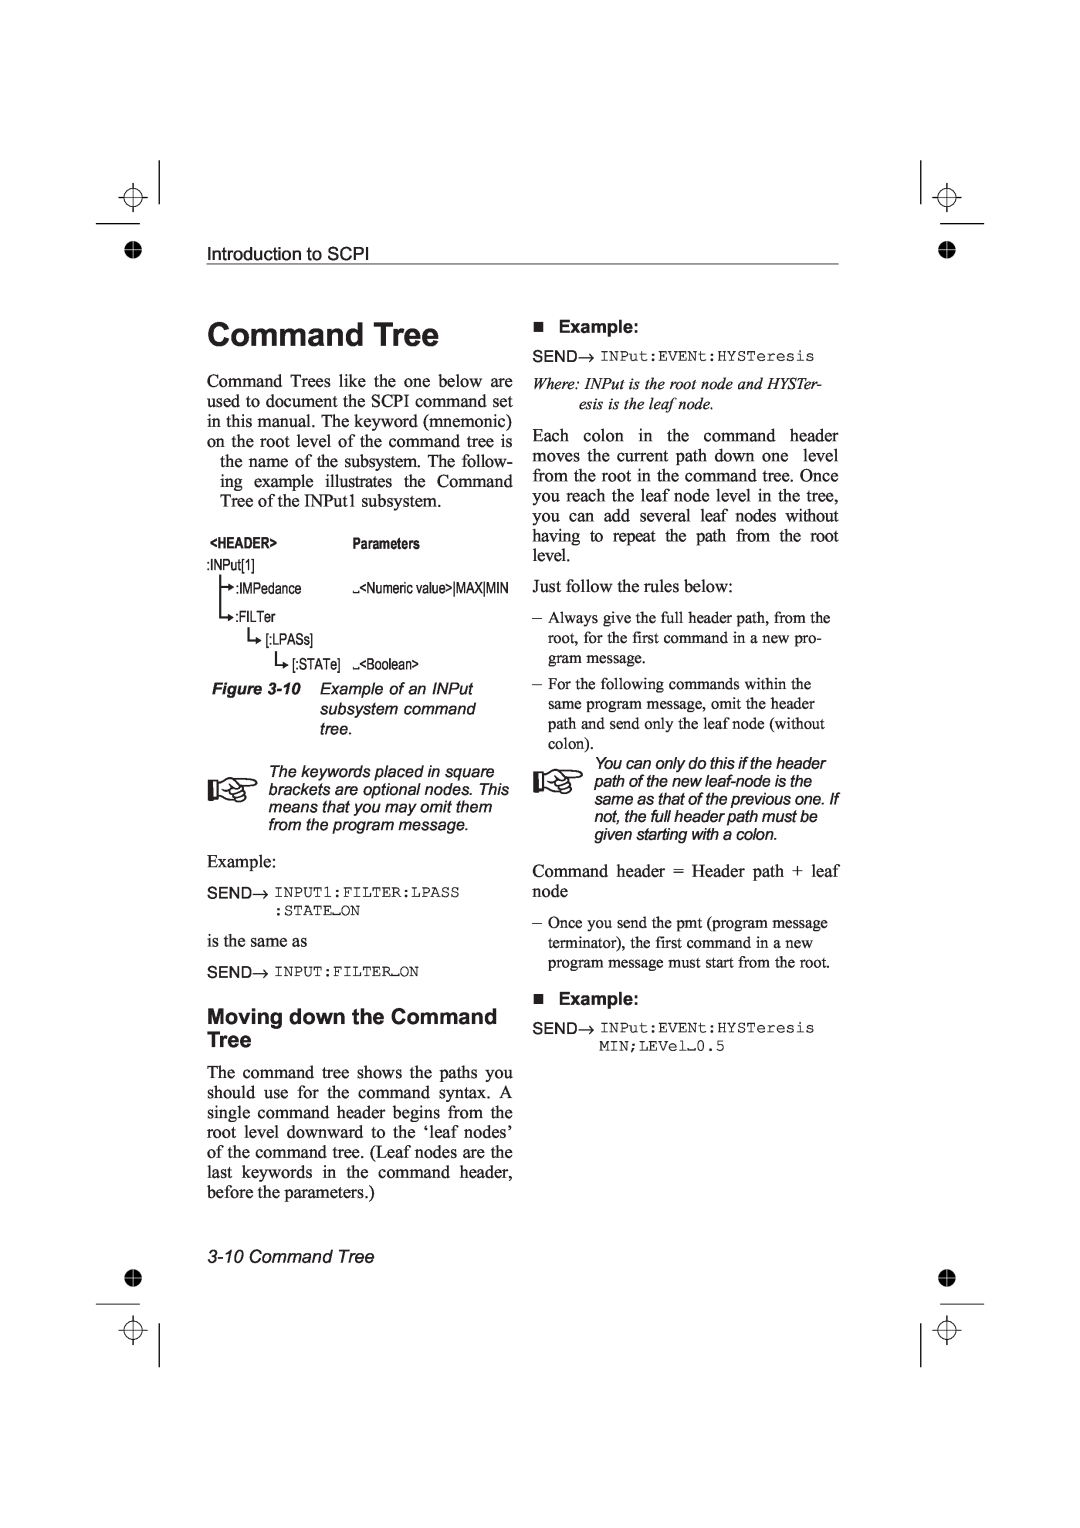 Fluke PM6685R, PM6681R manual Moving down the Command Tree, Example 